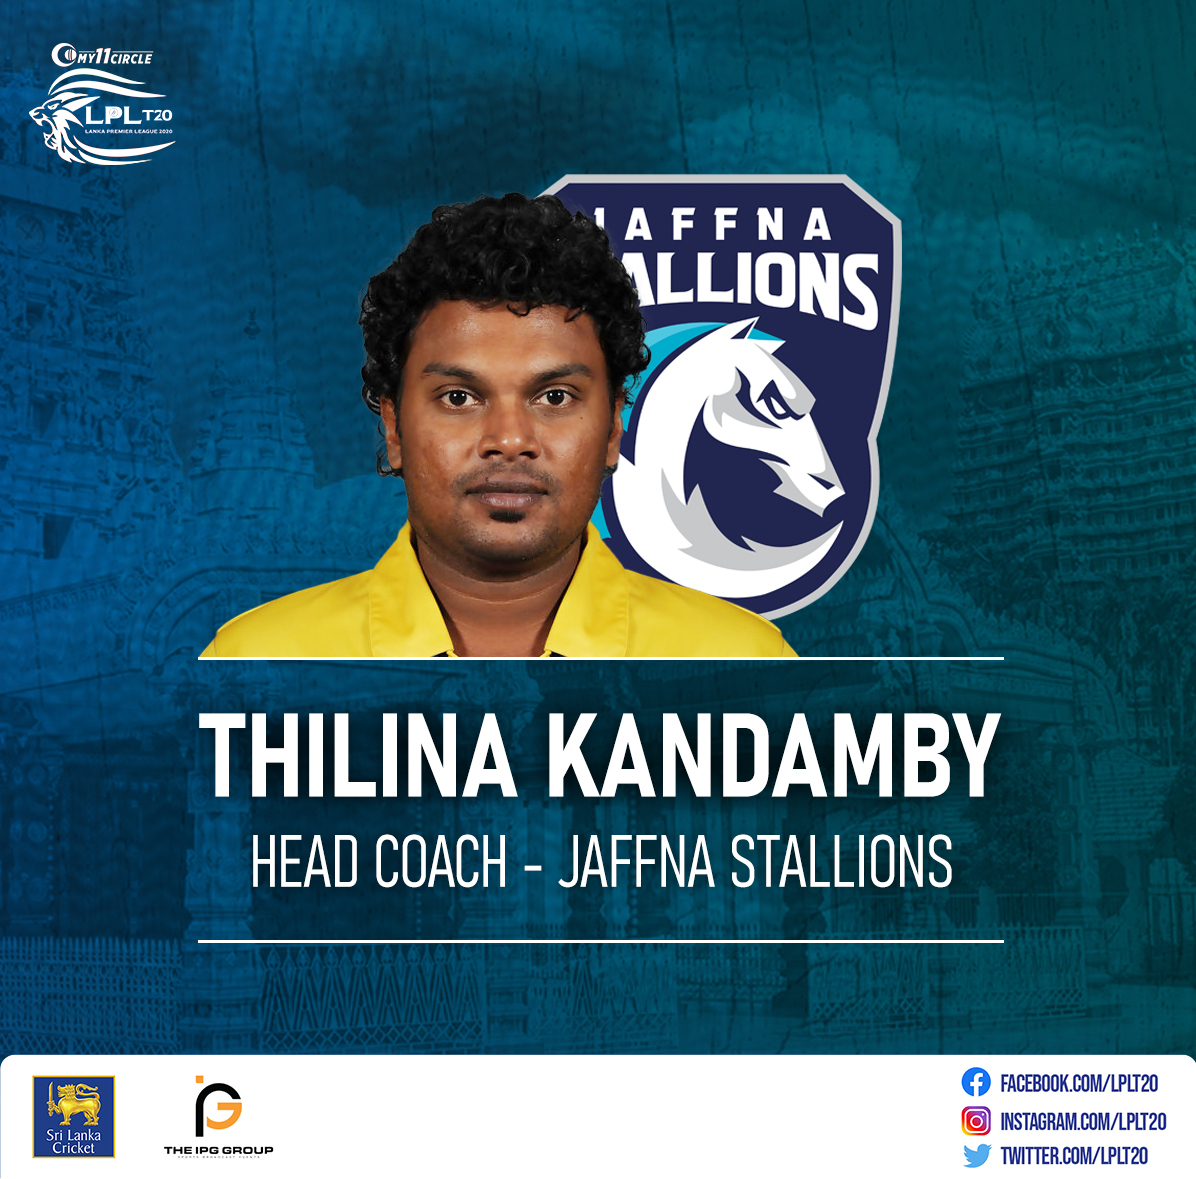 Thilina Kandamby, Head Coach of Jaffna Stallions in charge of a potential assortment of players